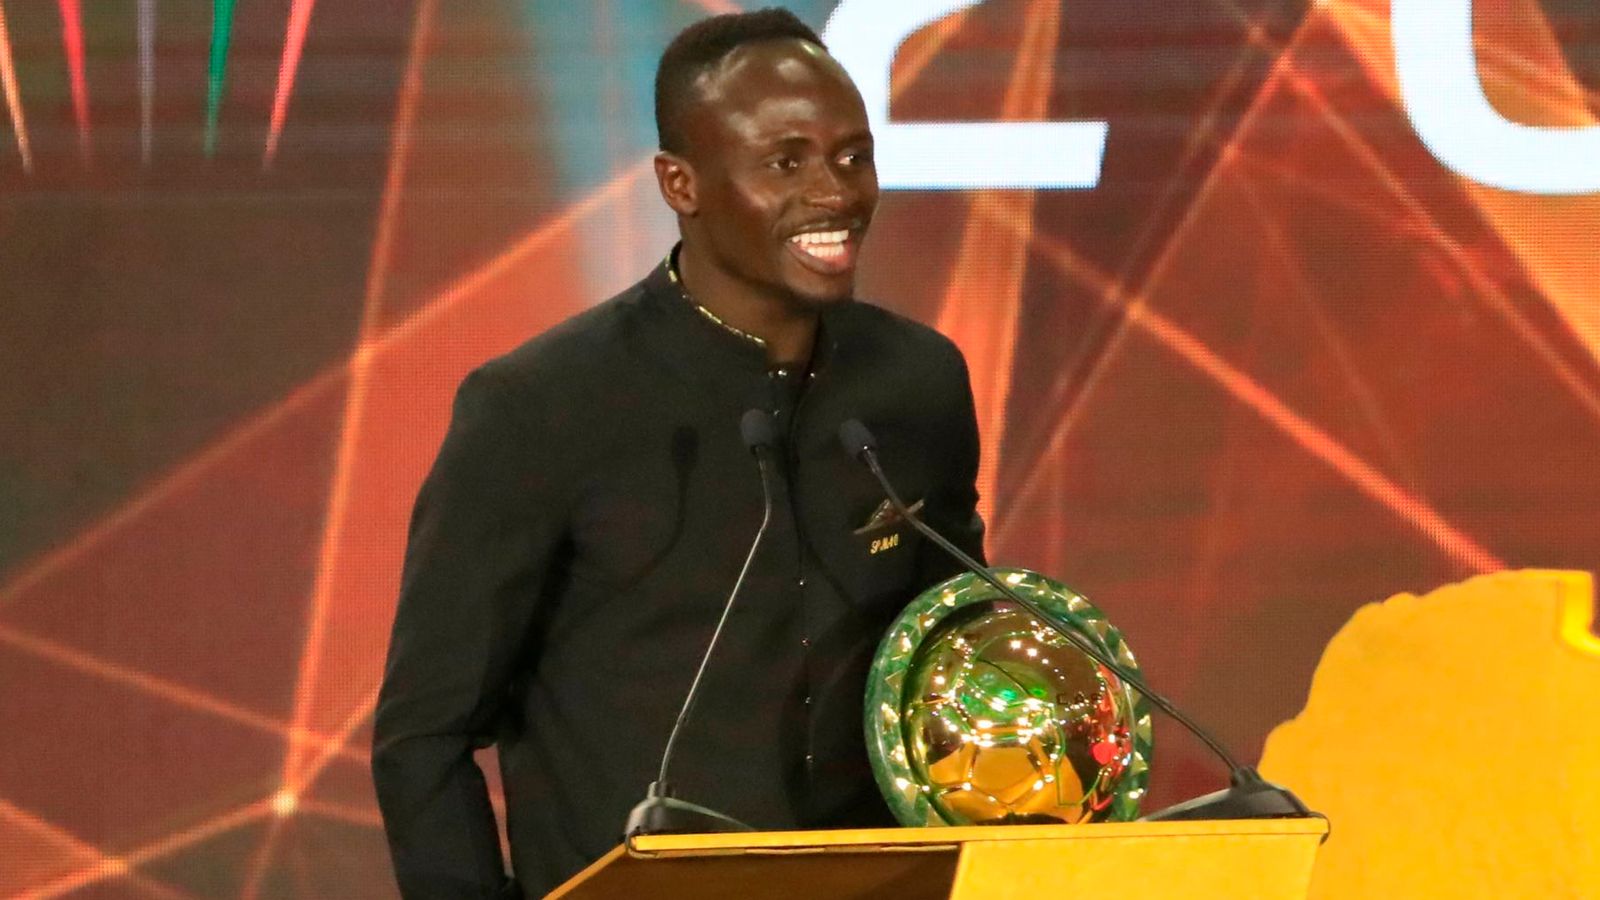 Sadio Mane named African Player of the Year ahead of Mohamed Salah and